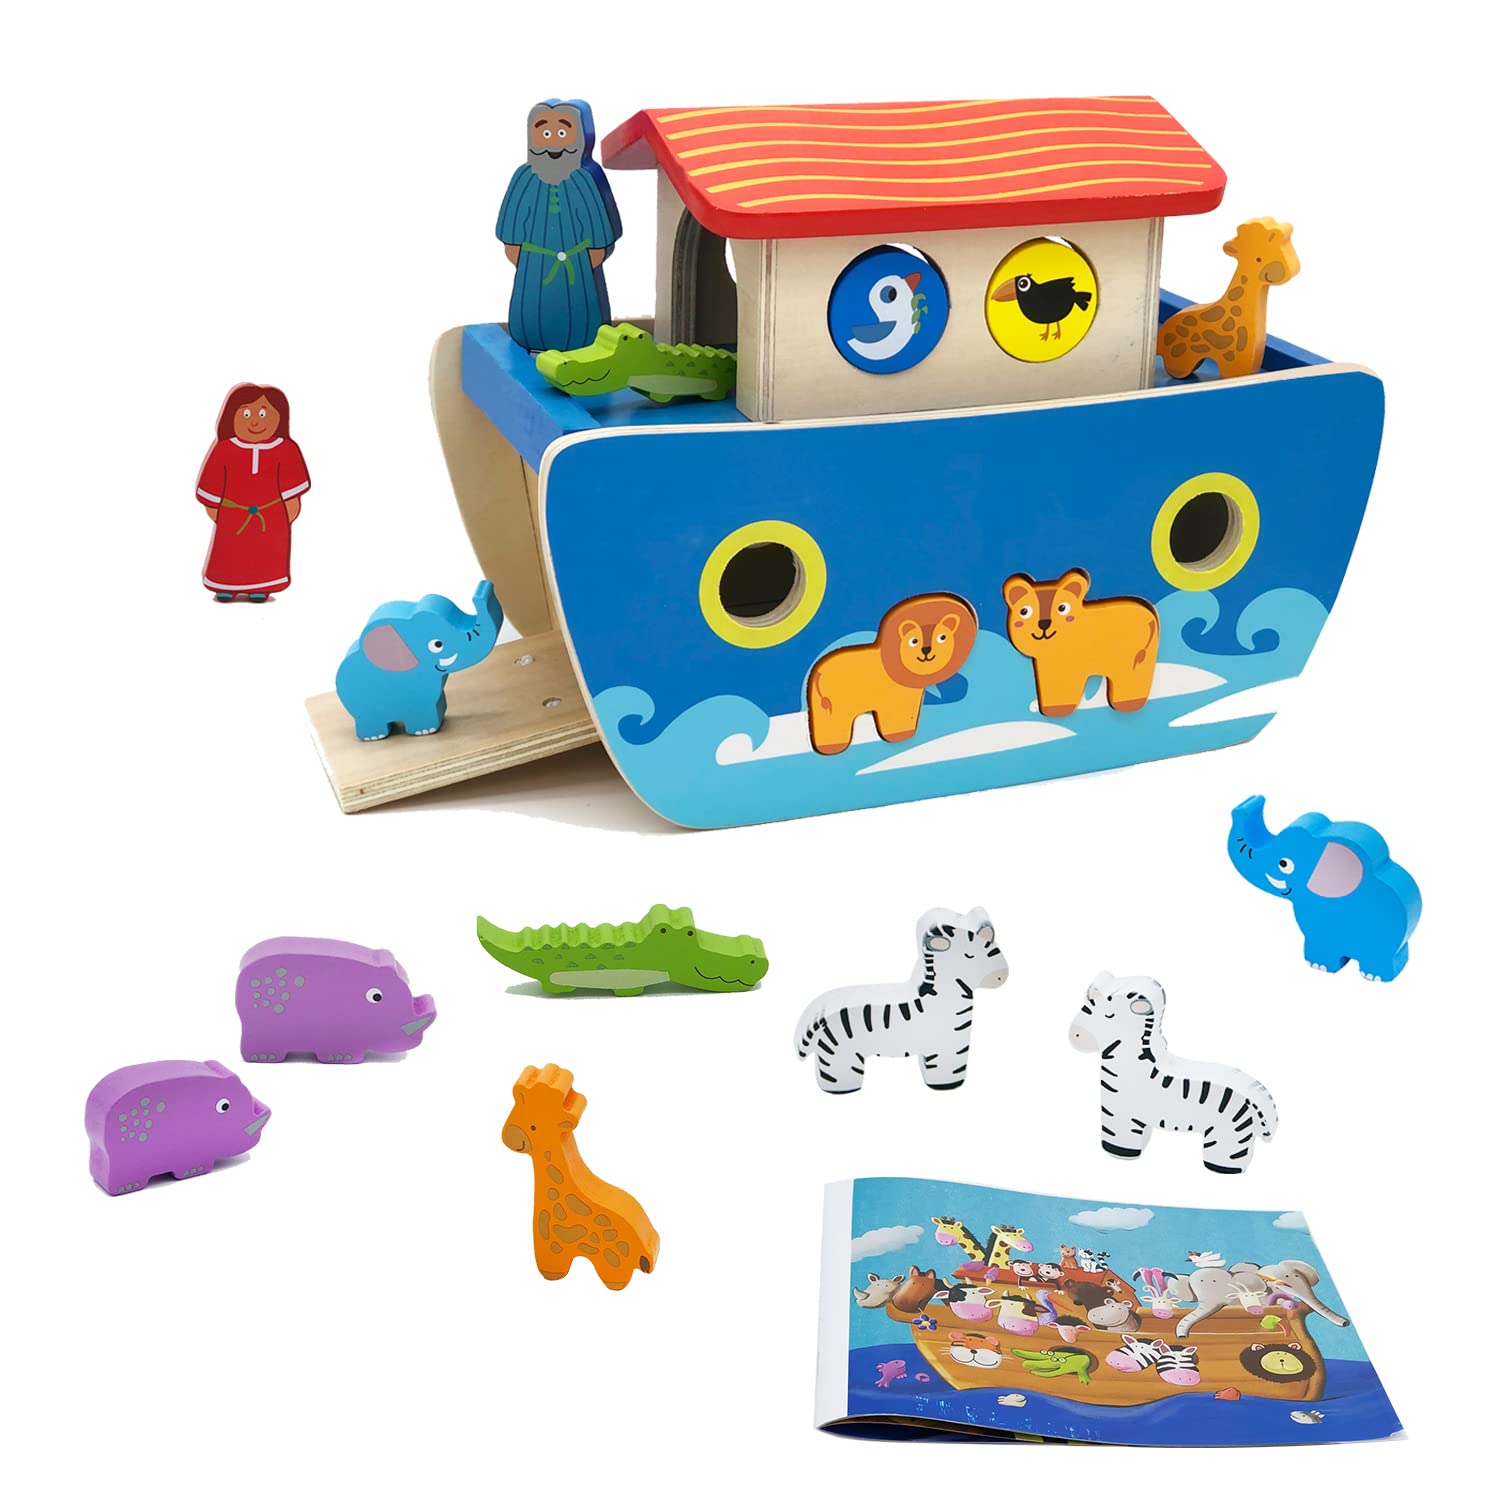 DOLLERGO Noah's Ark Toys for Toddlers Wooden Baptism Gifts for Boys Girls 1 2 3 Year Old Christian Bible Toys Kids Learning Toys with Story Book for 12 18 24 Months Babies